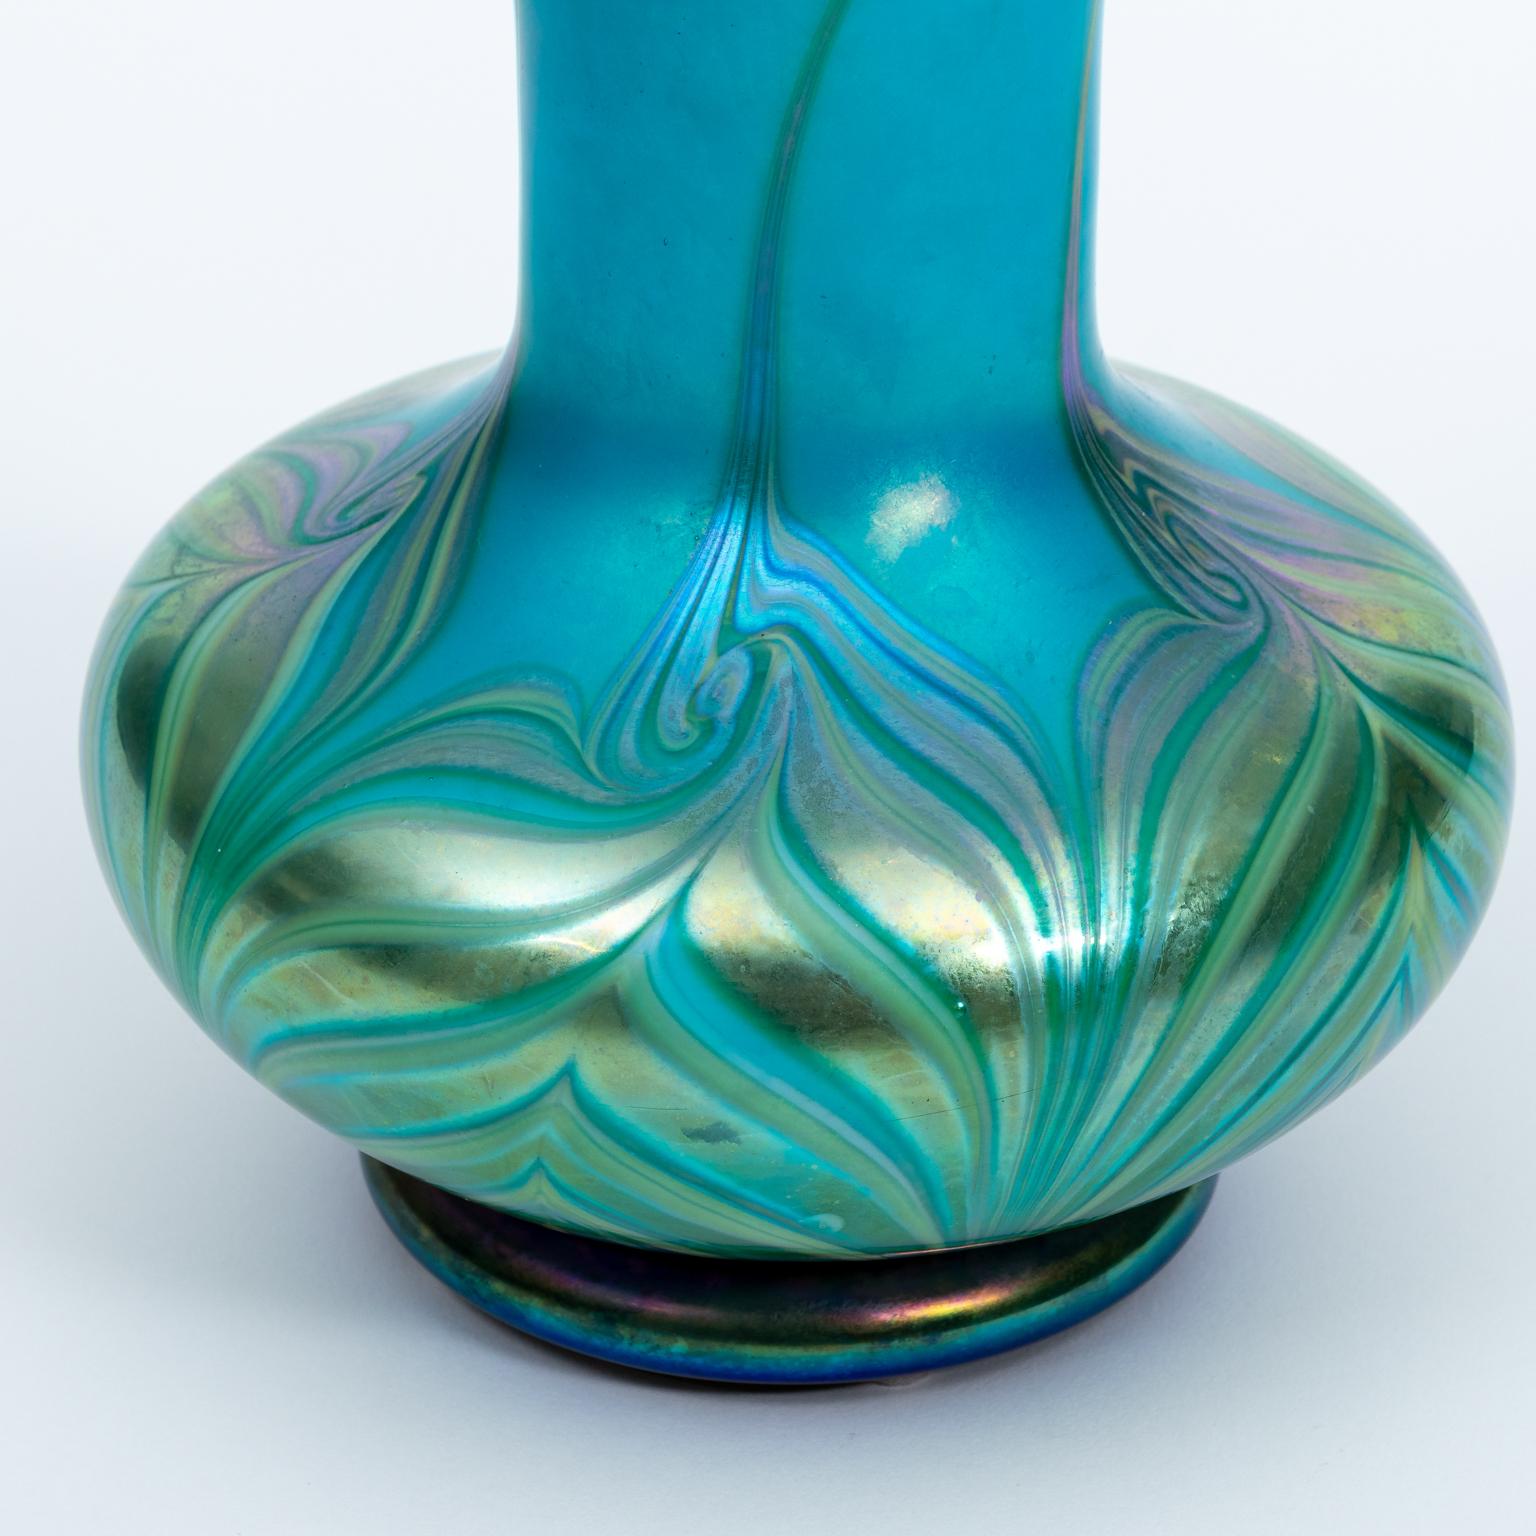 King Tut design vase by Lunderg, a premier art glass manufacturing company based in Davenport, California, circa 2002. Lundberg Studios was founded by James Lunderg in 1970s, This piece is marked on the bottom Lundberg Studios 2002. Made in the